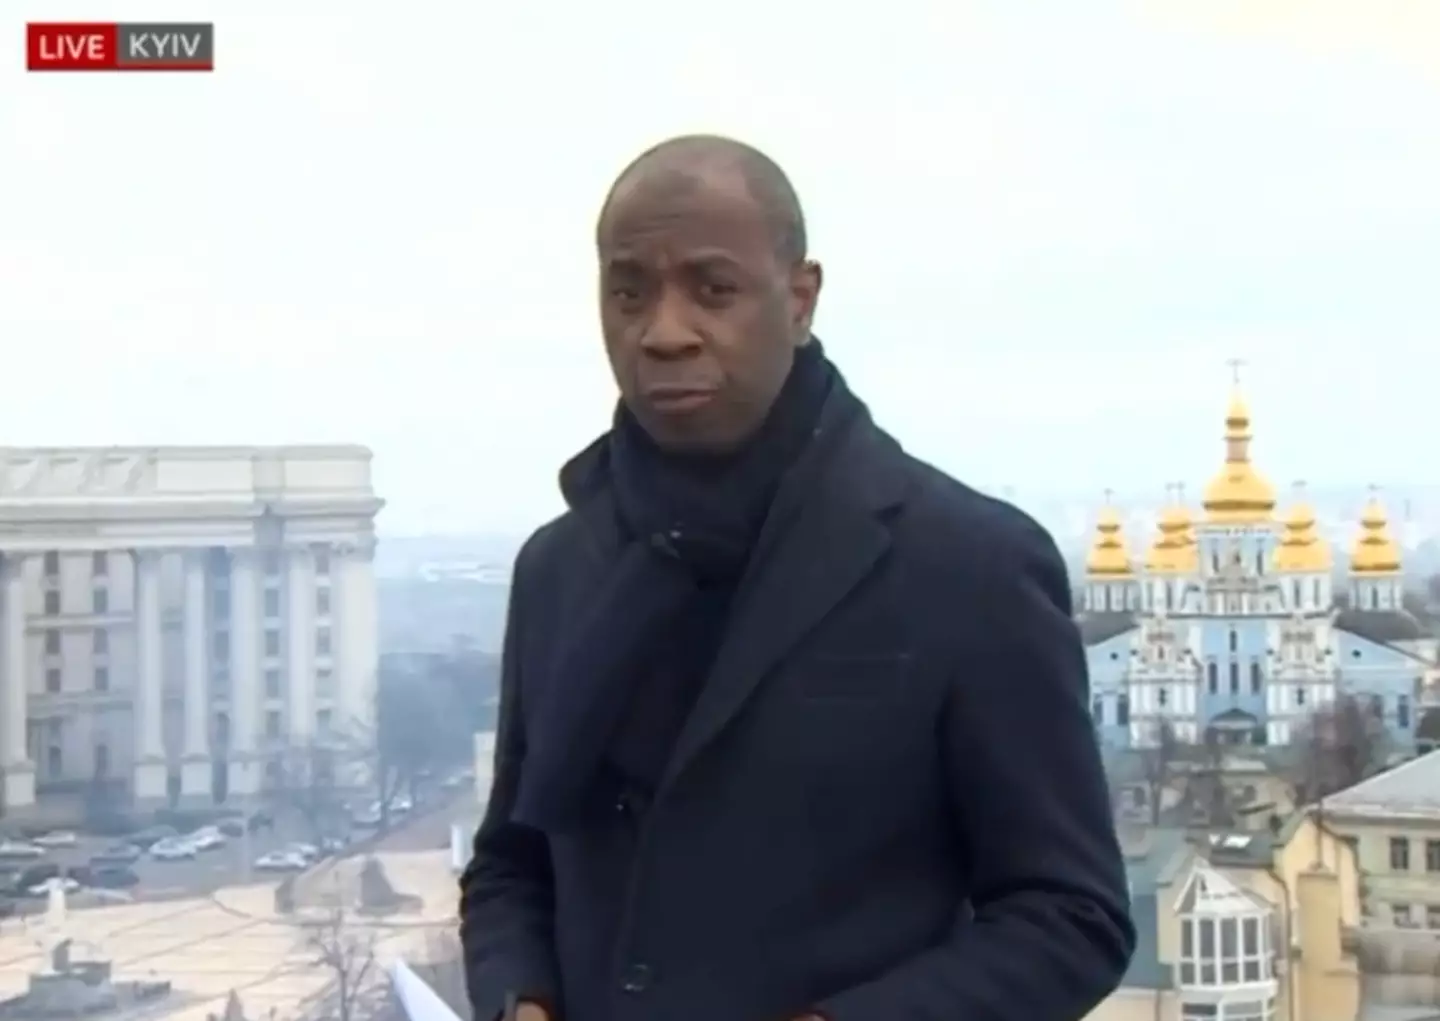 BBC presenter Clive Myrie had been reporting live from Kyiv.